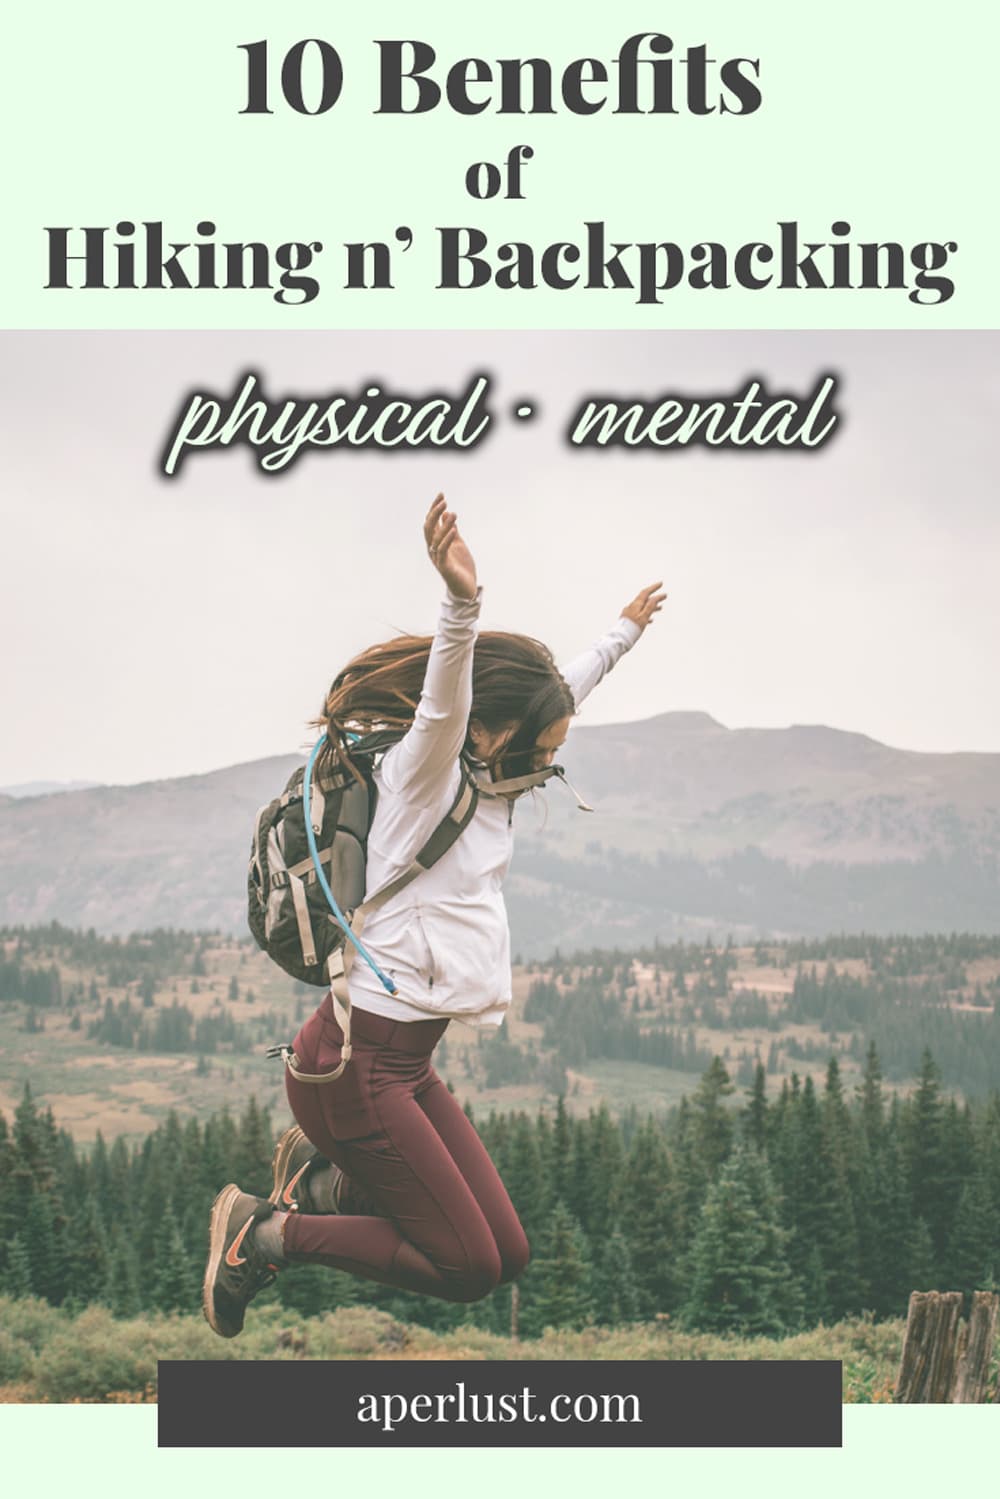 10 benefits of hiking and backpacking